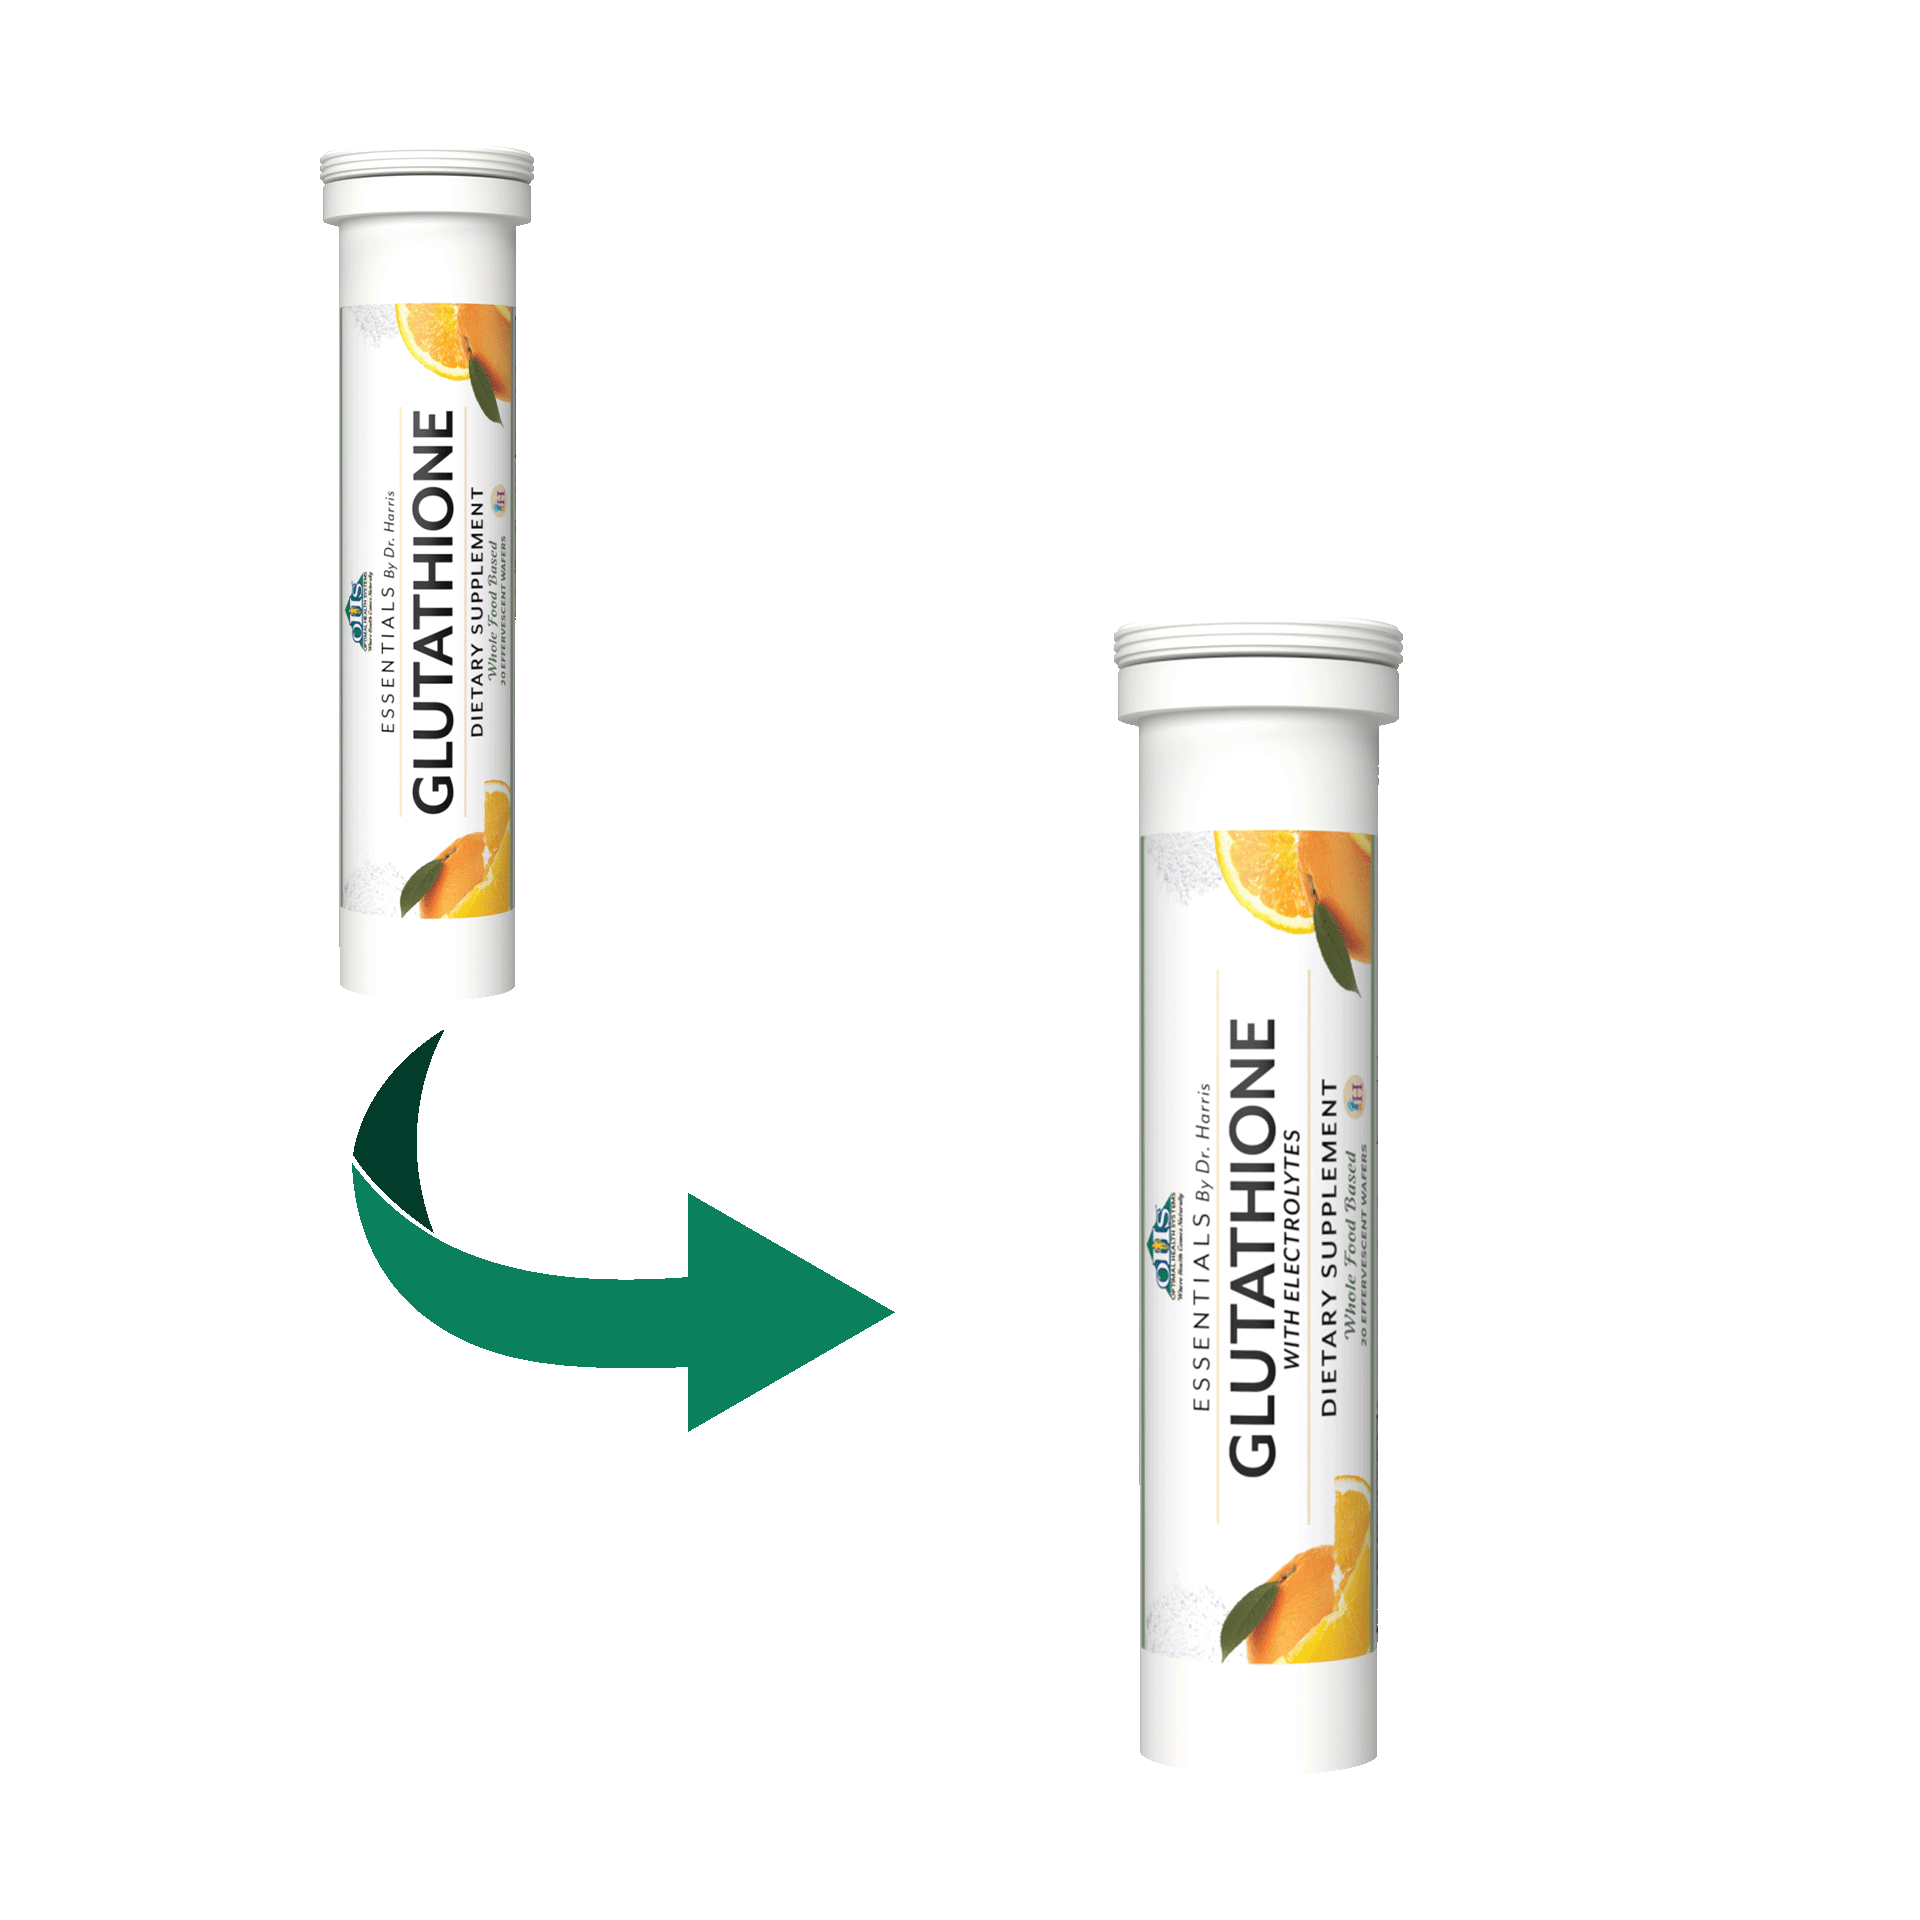 Image of a Tube of Essentials Glutathione with a green arrow pointing to its new label mentioning that it has Electrolytes.